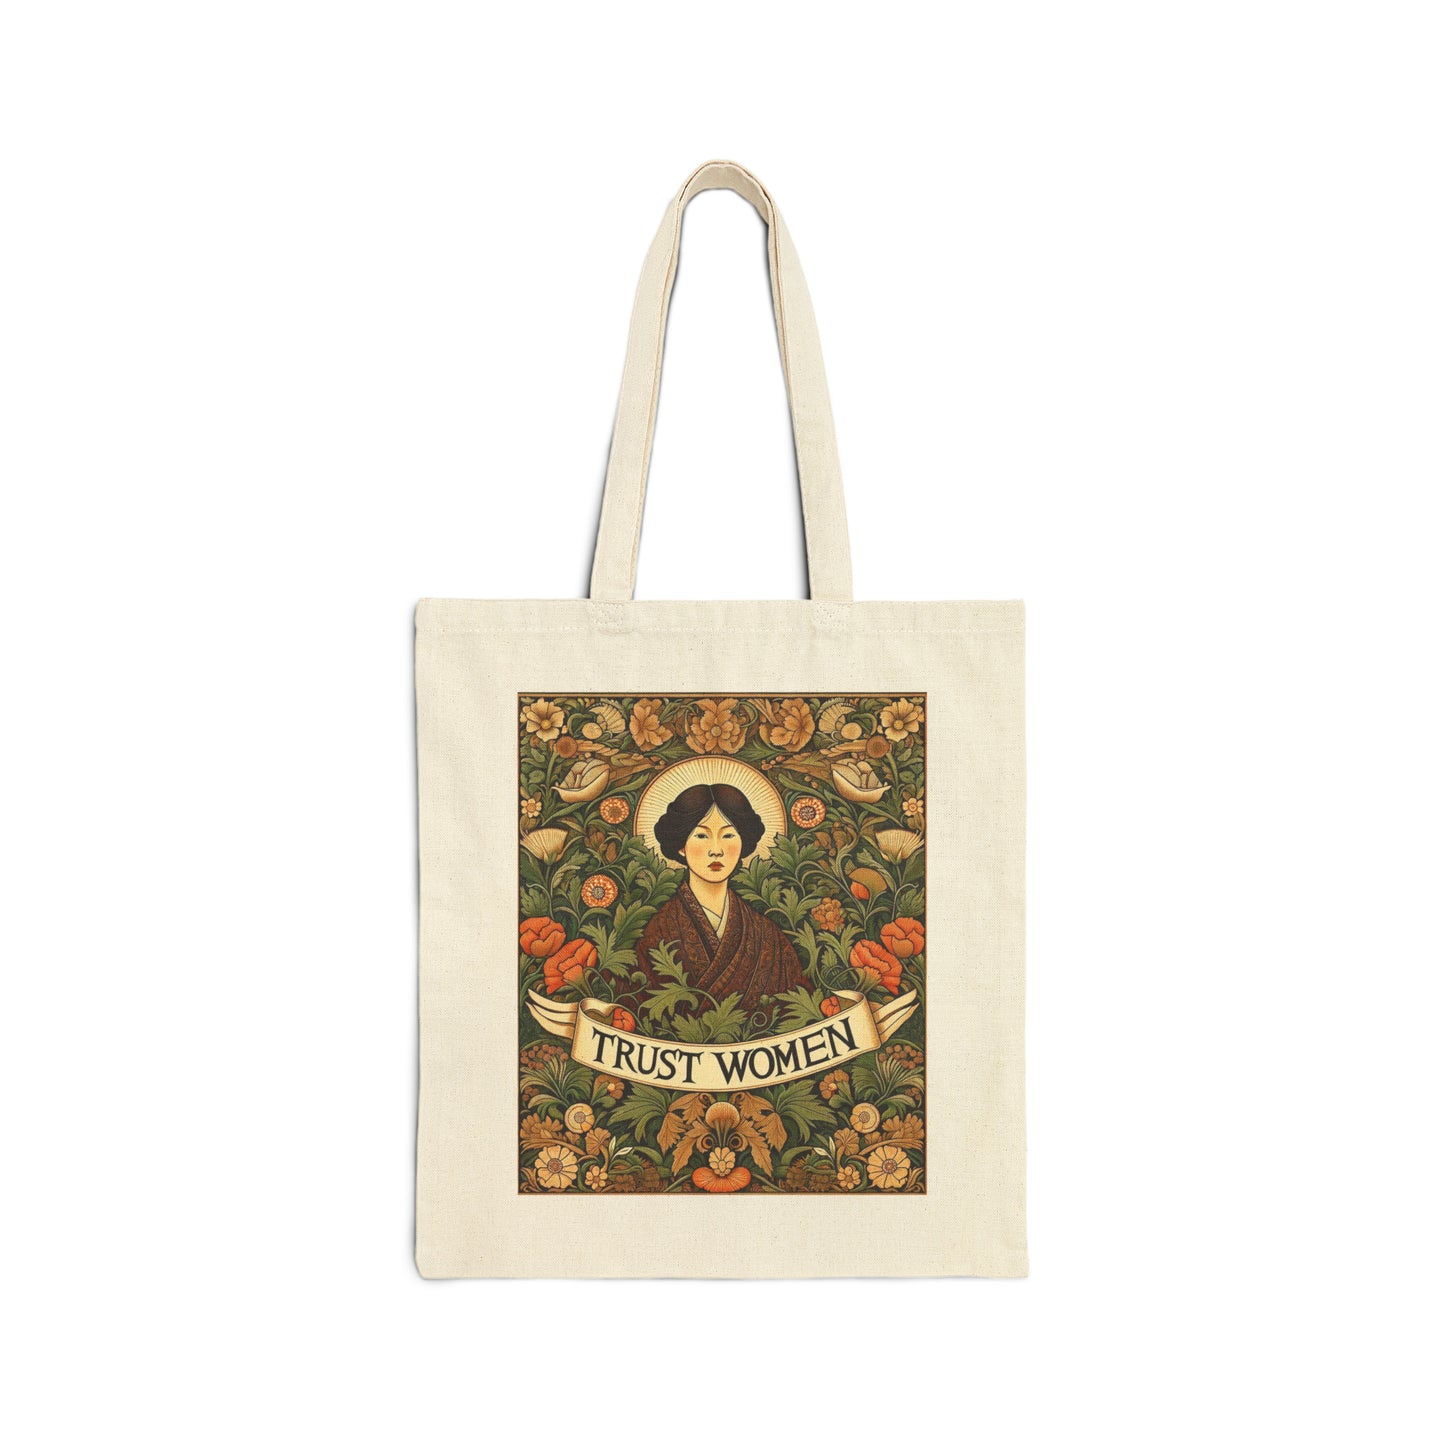 Inspirational Statement Cotton Cavas Tote Bag: Trust Women! & carry a laptop, kindle, phone, ipad, notebook goodies to work/coffee shop